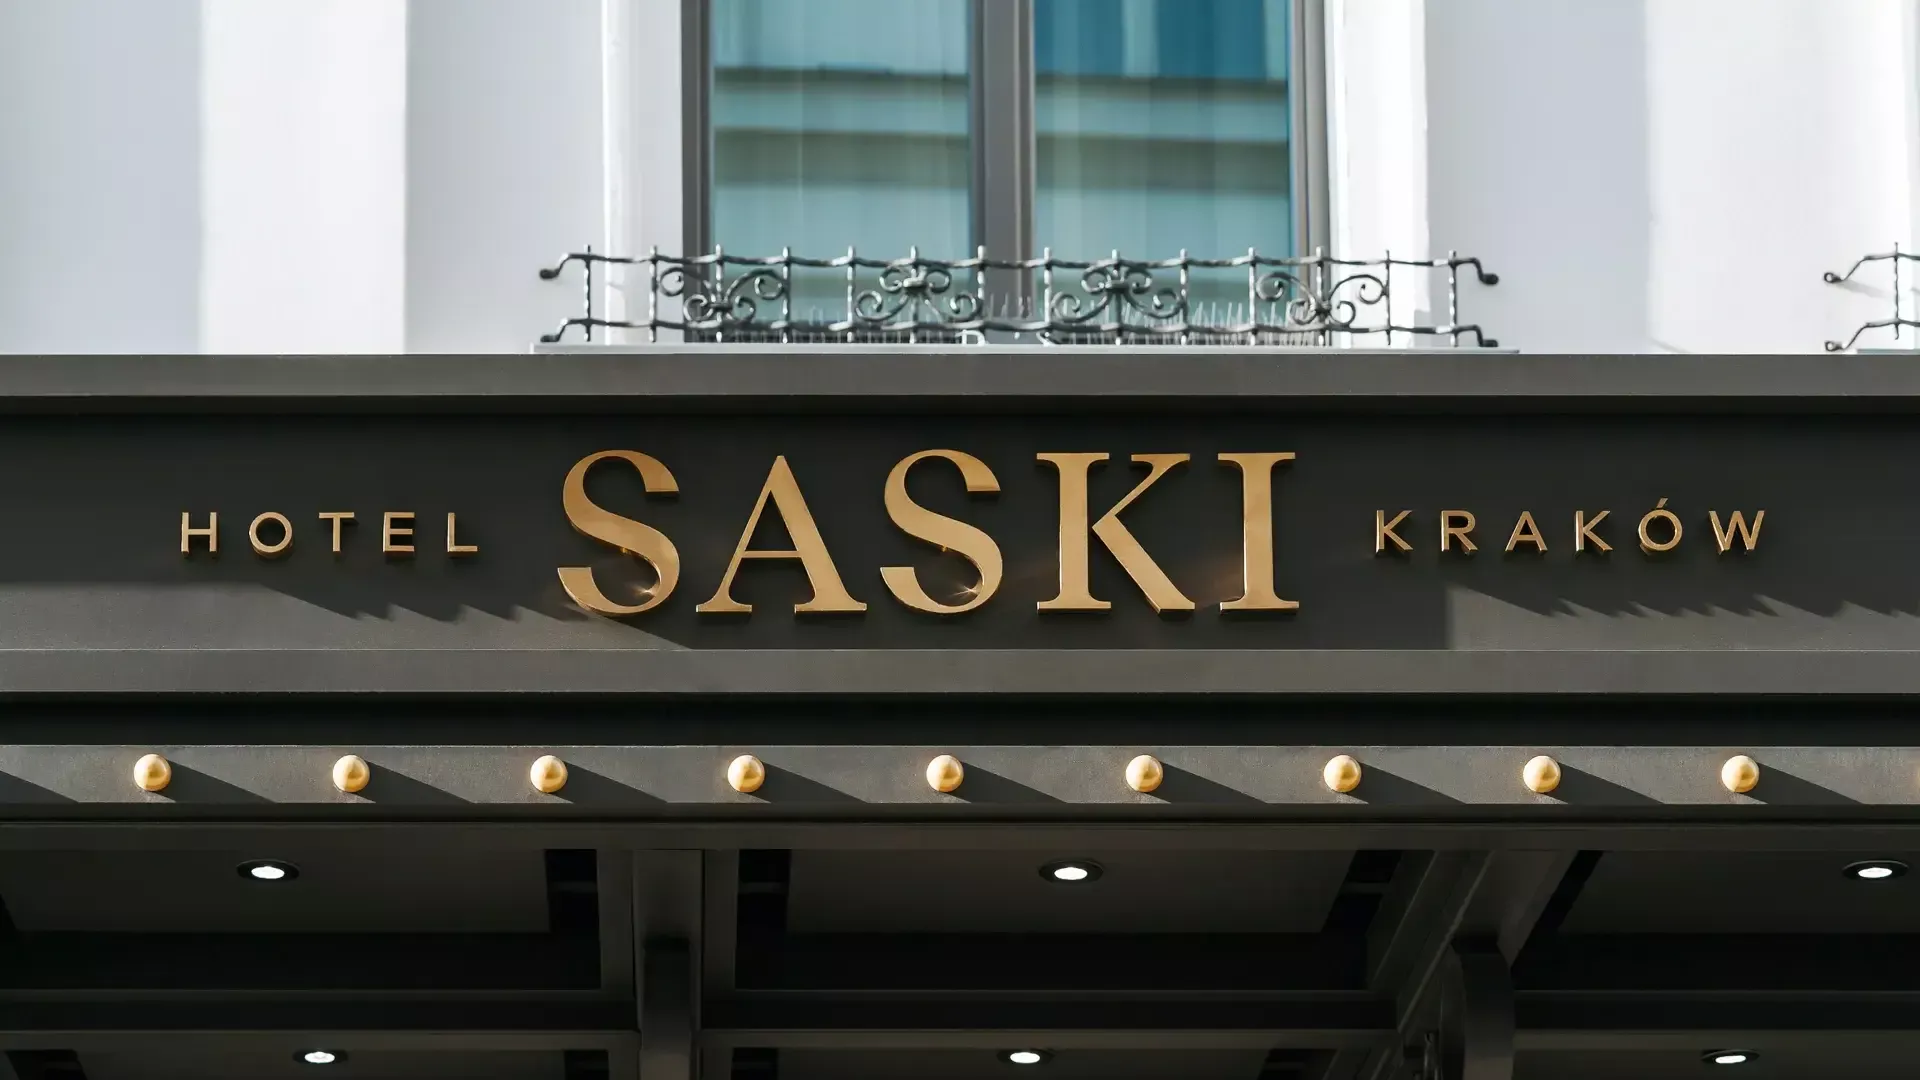 Saski Hotel - Gold brushed stainless steel letters on the exterior of the Saski Hotel building